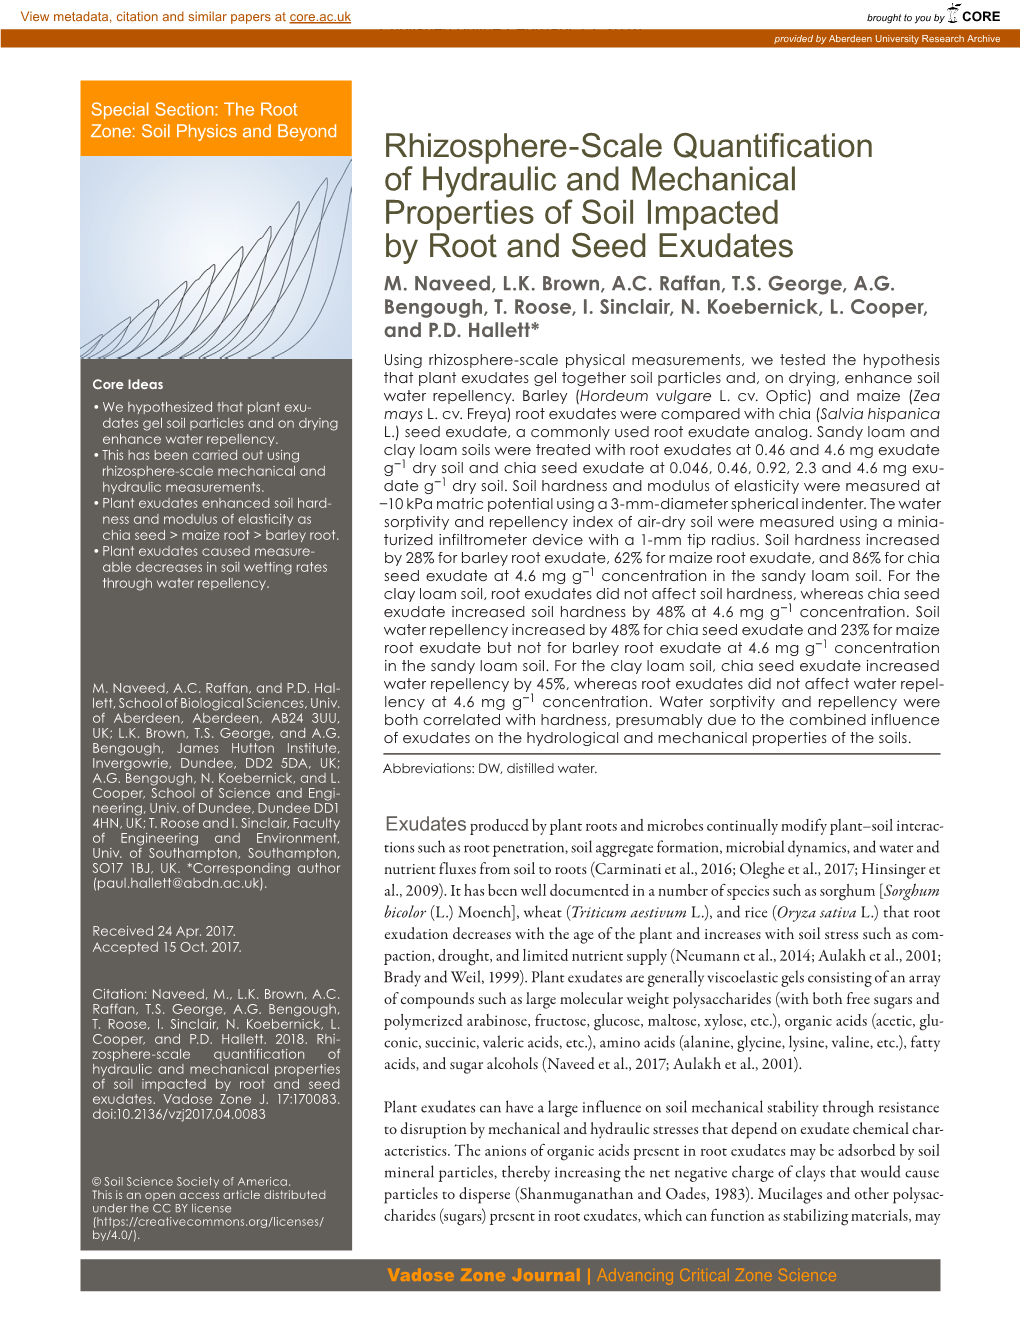 Rhizosphere-Scale Quantification of Hydraulic and Mechanical Properties of Soil Impacted by Root and Seed Exudates M